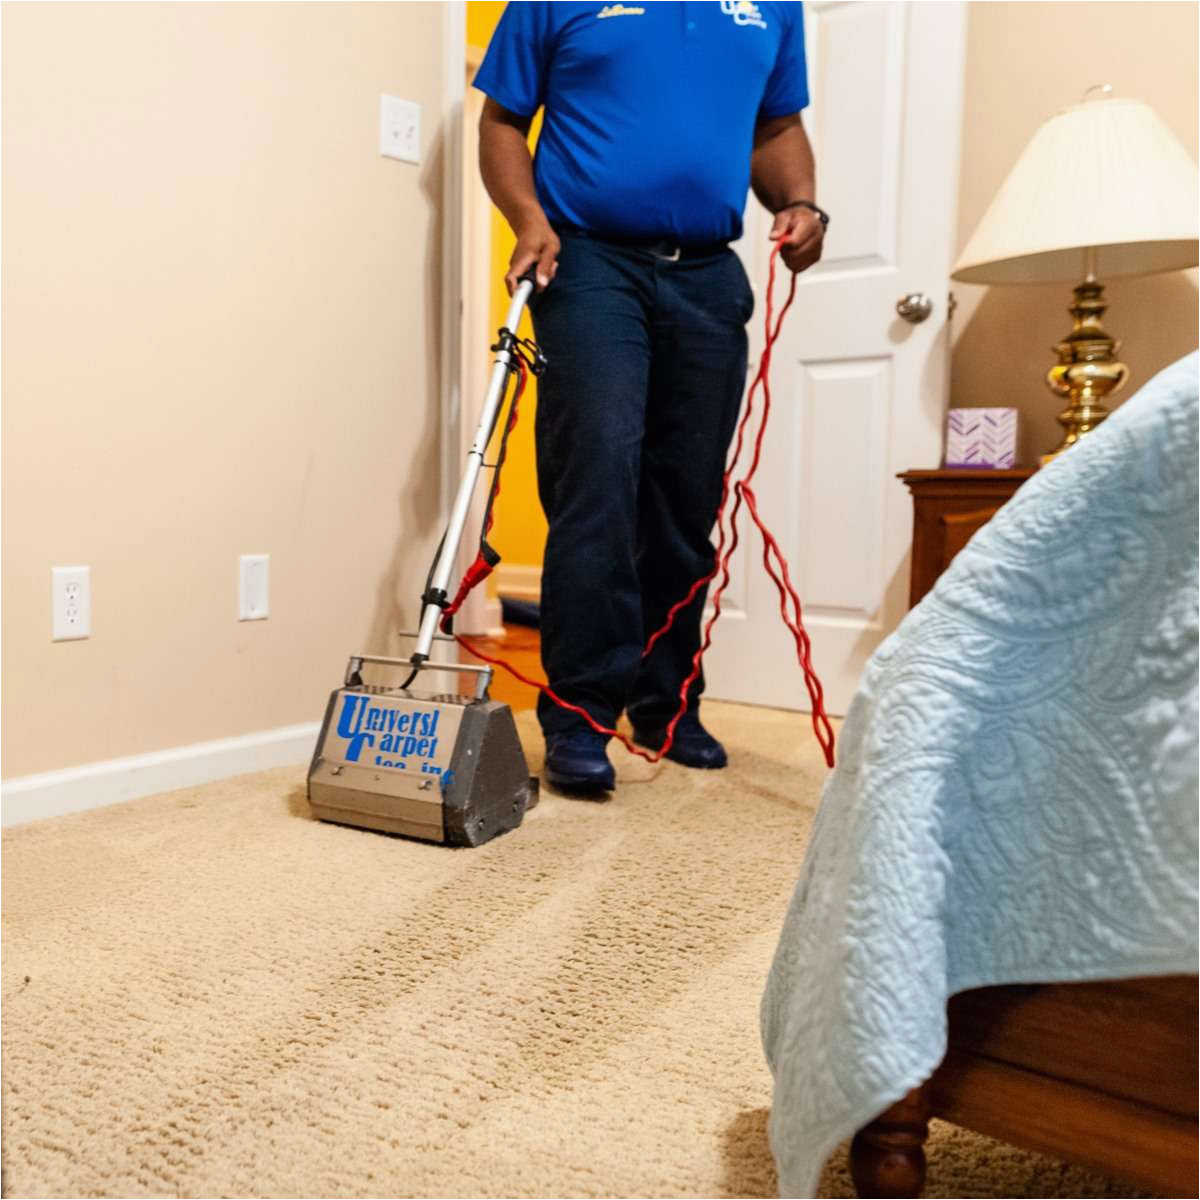 Area Rug Cleaning Augusta Ga Carpet Cleaning In Augusta, Ga- Universal Carpet Cleaning